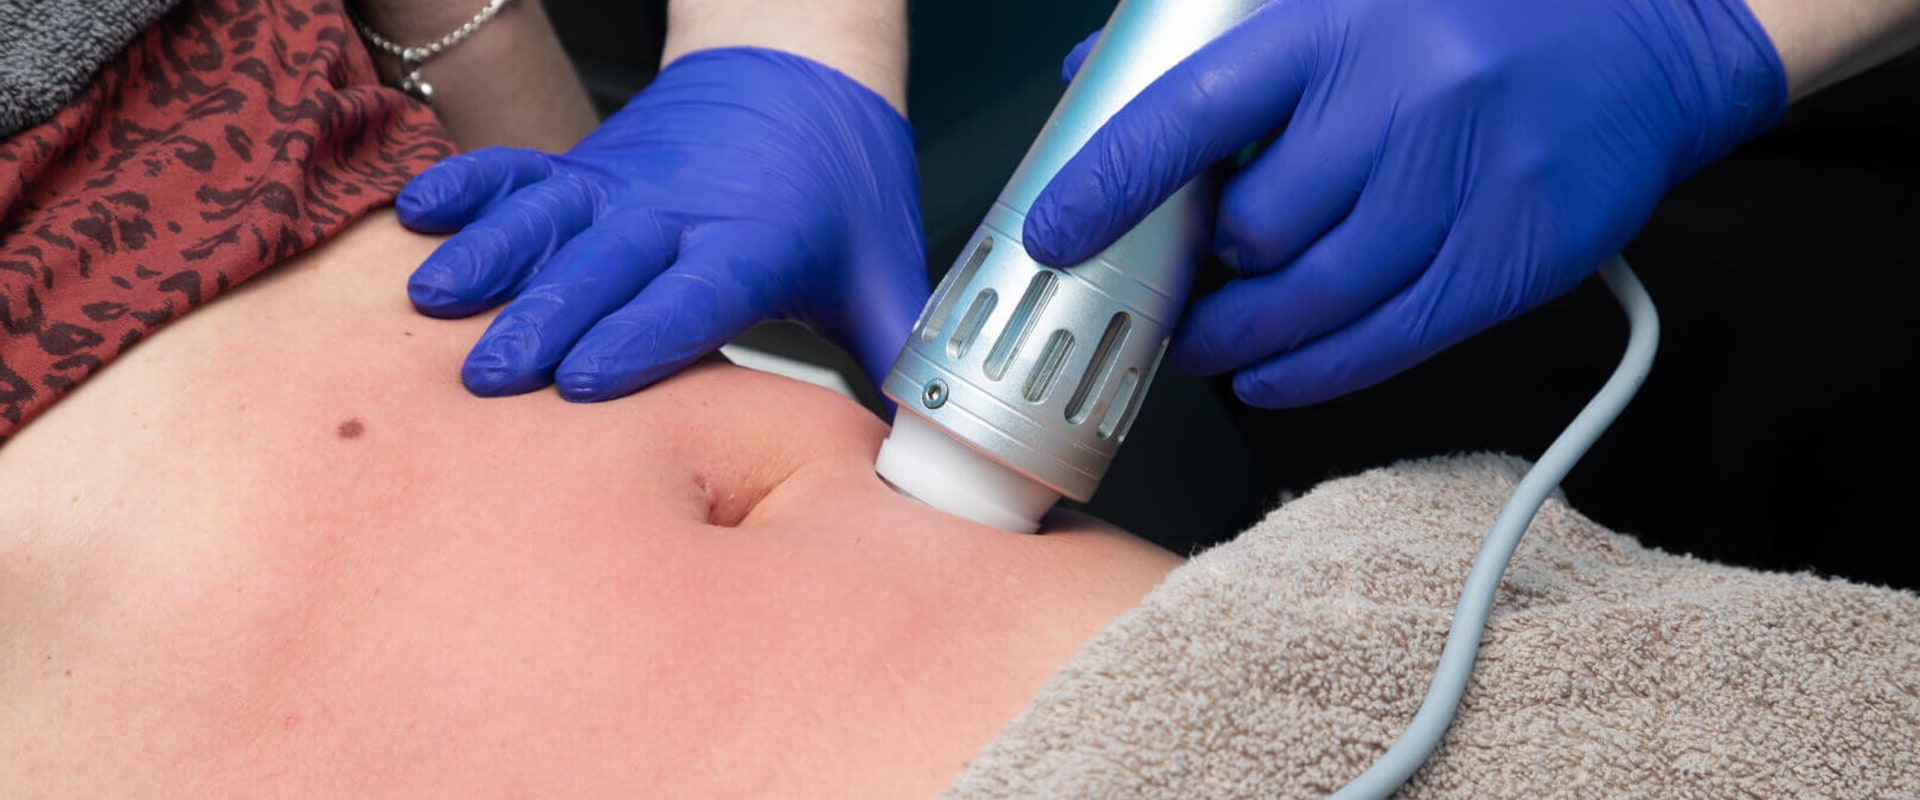 What can i expect after shock wave therapy?